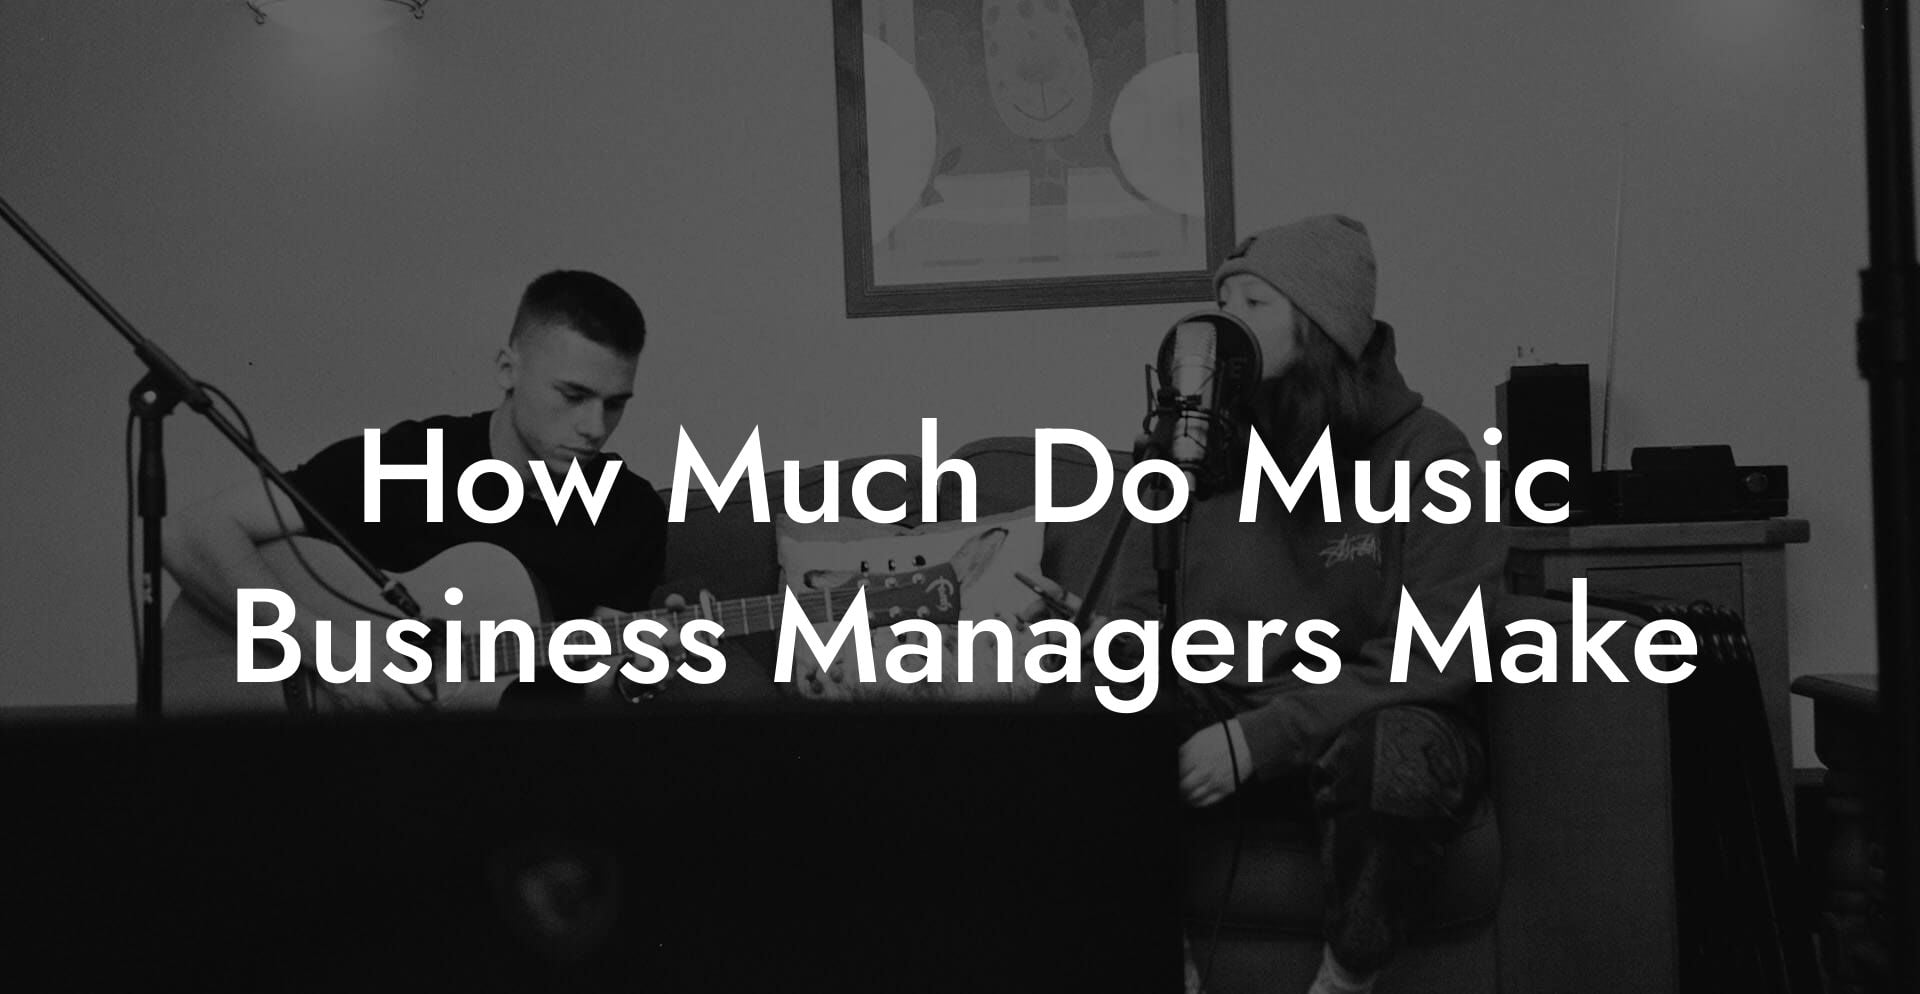 How Much Do Music Business Managers Make